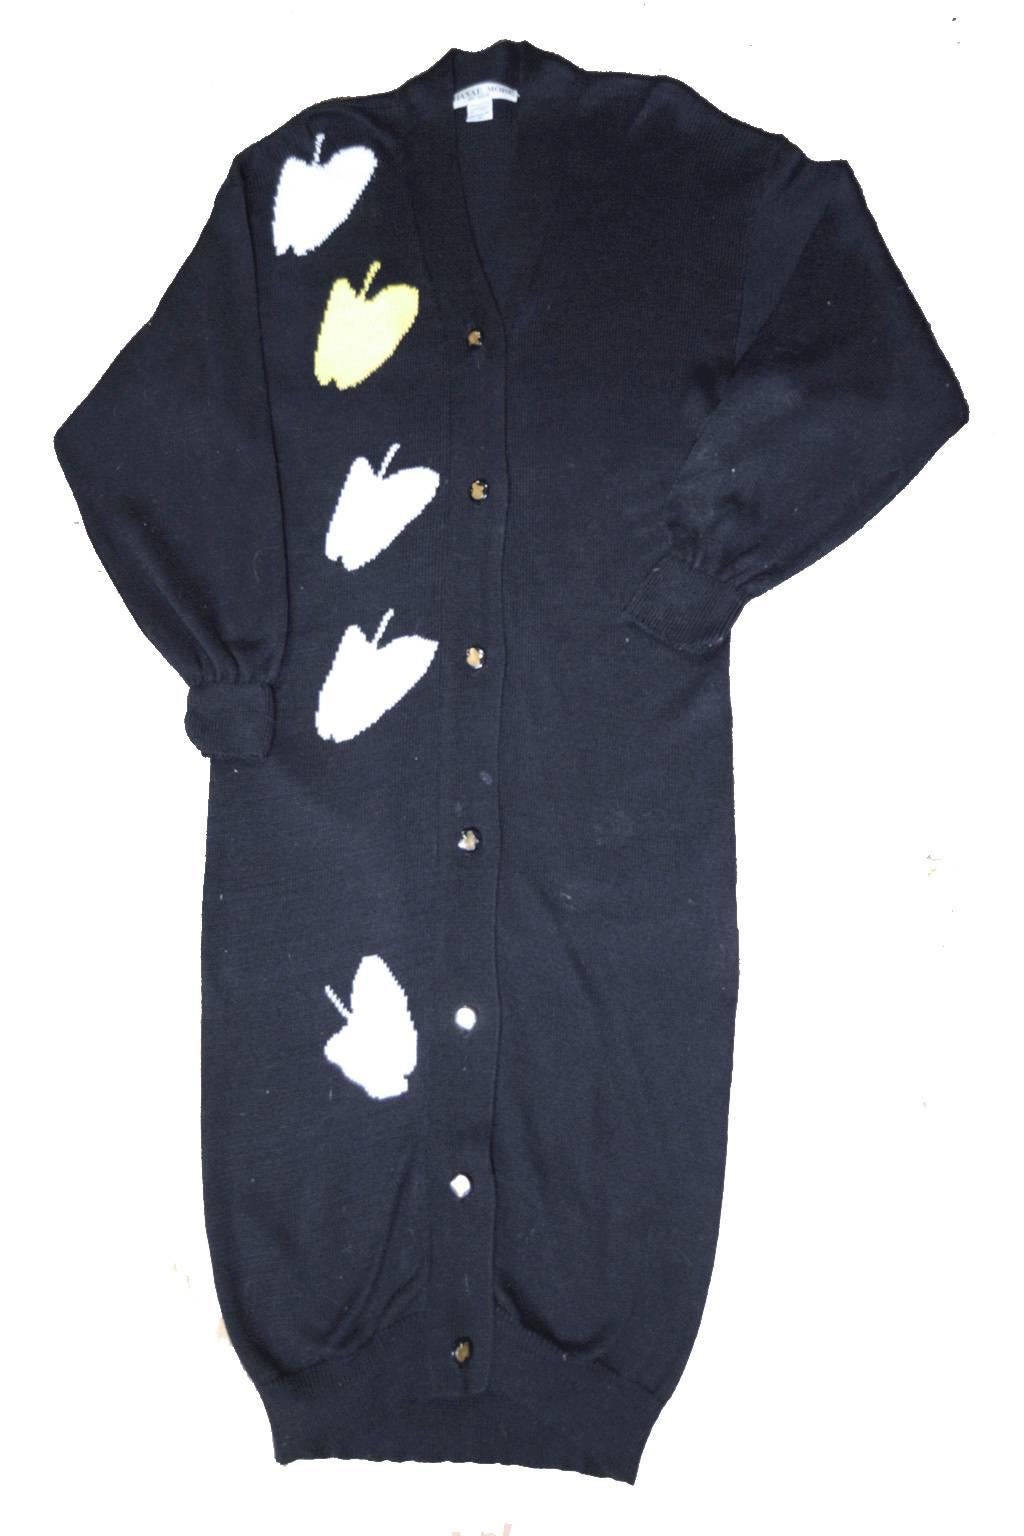 Hanae Mori navy blue long knit cardigan with apple print along front and back.  White apples compliment the navy design with one yellow apple to offset the entire look. 7 button front closure.  100% cotton. Ribbed hemlines. Dolman style sleeves.